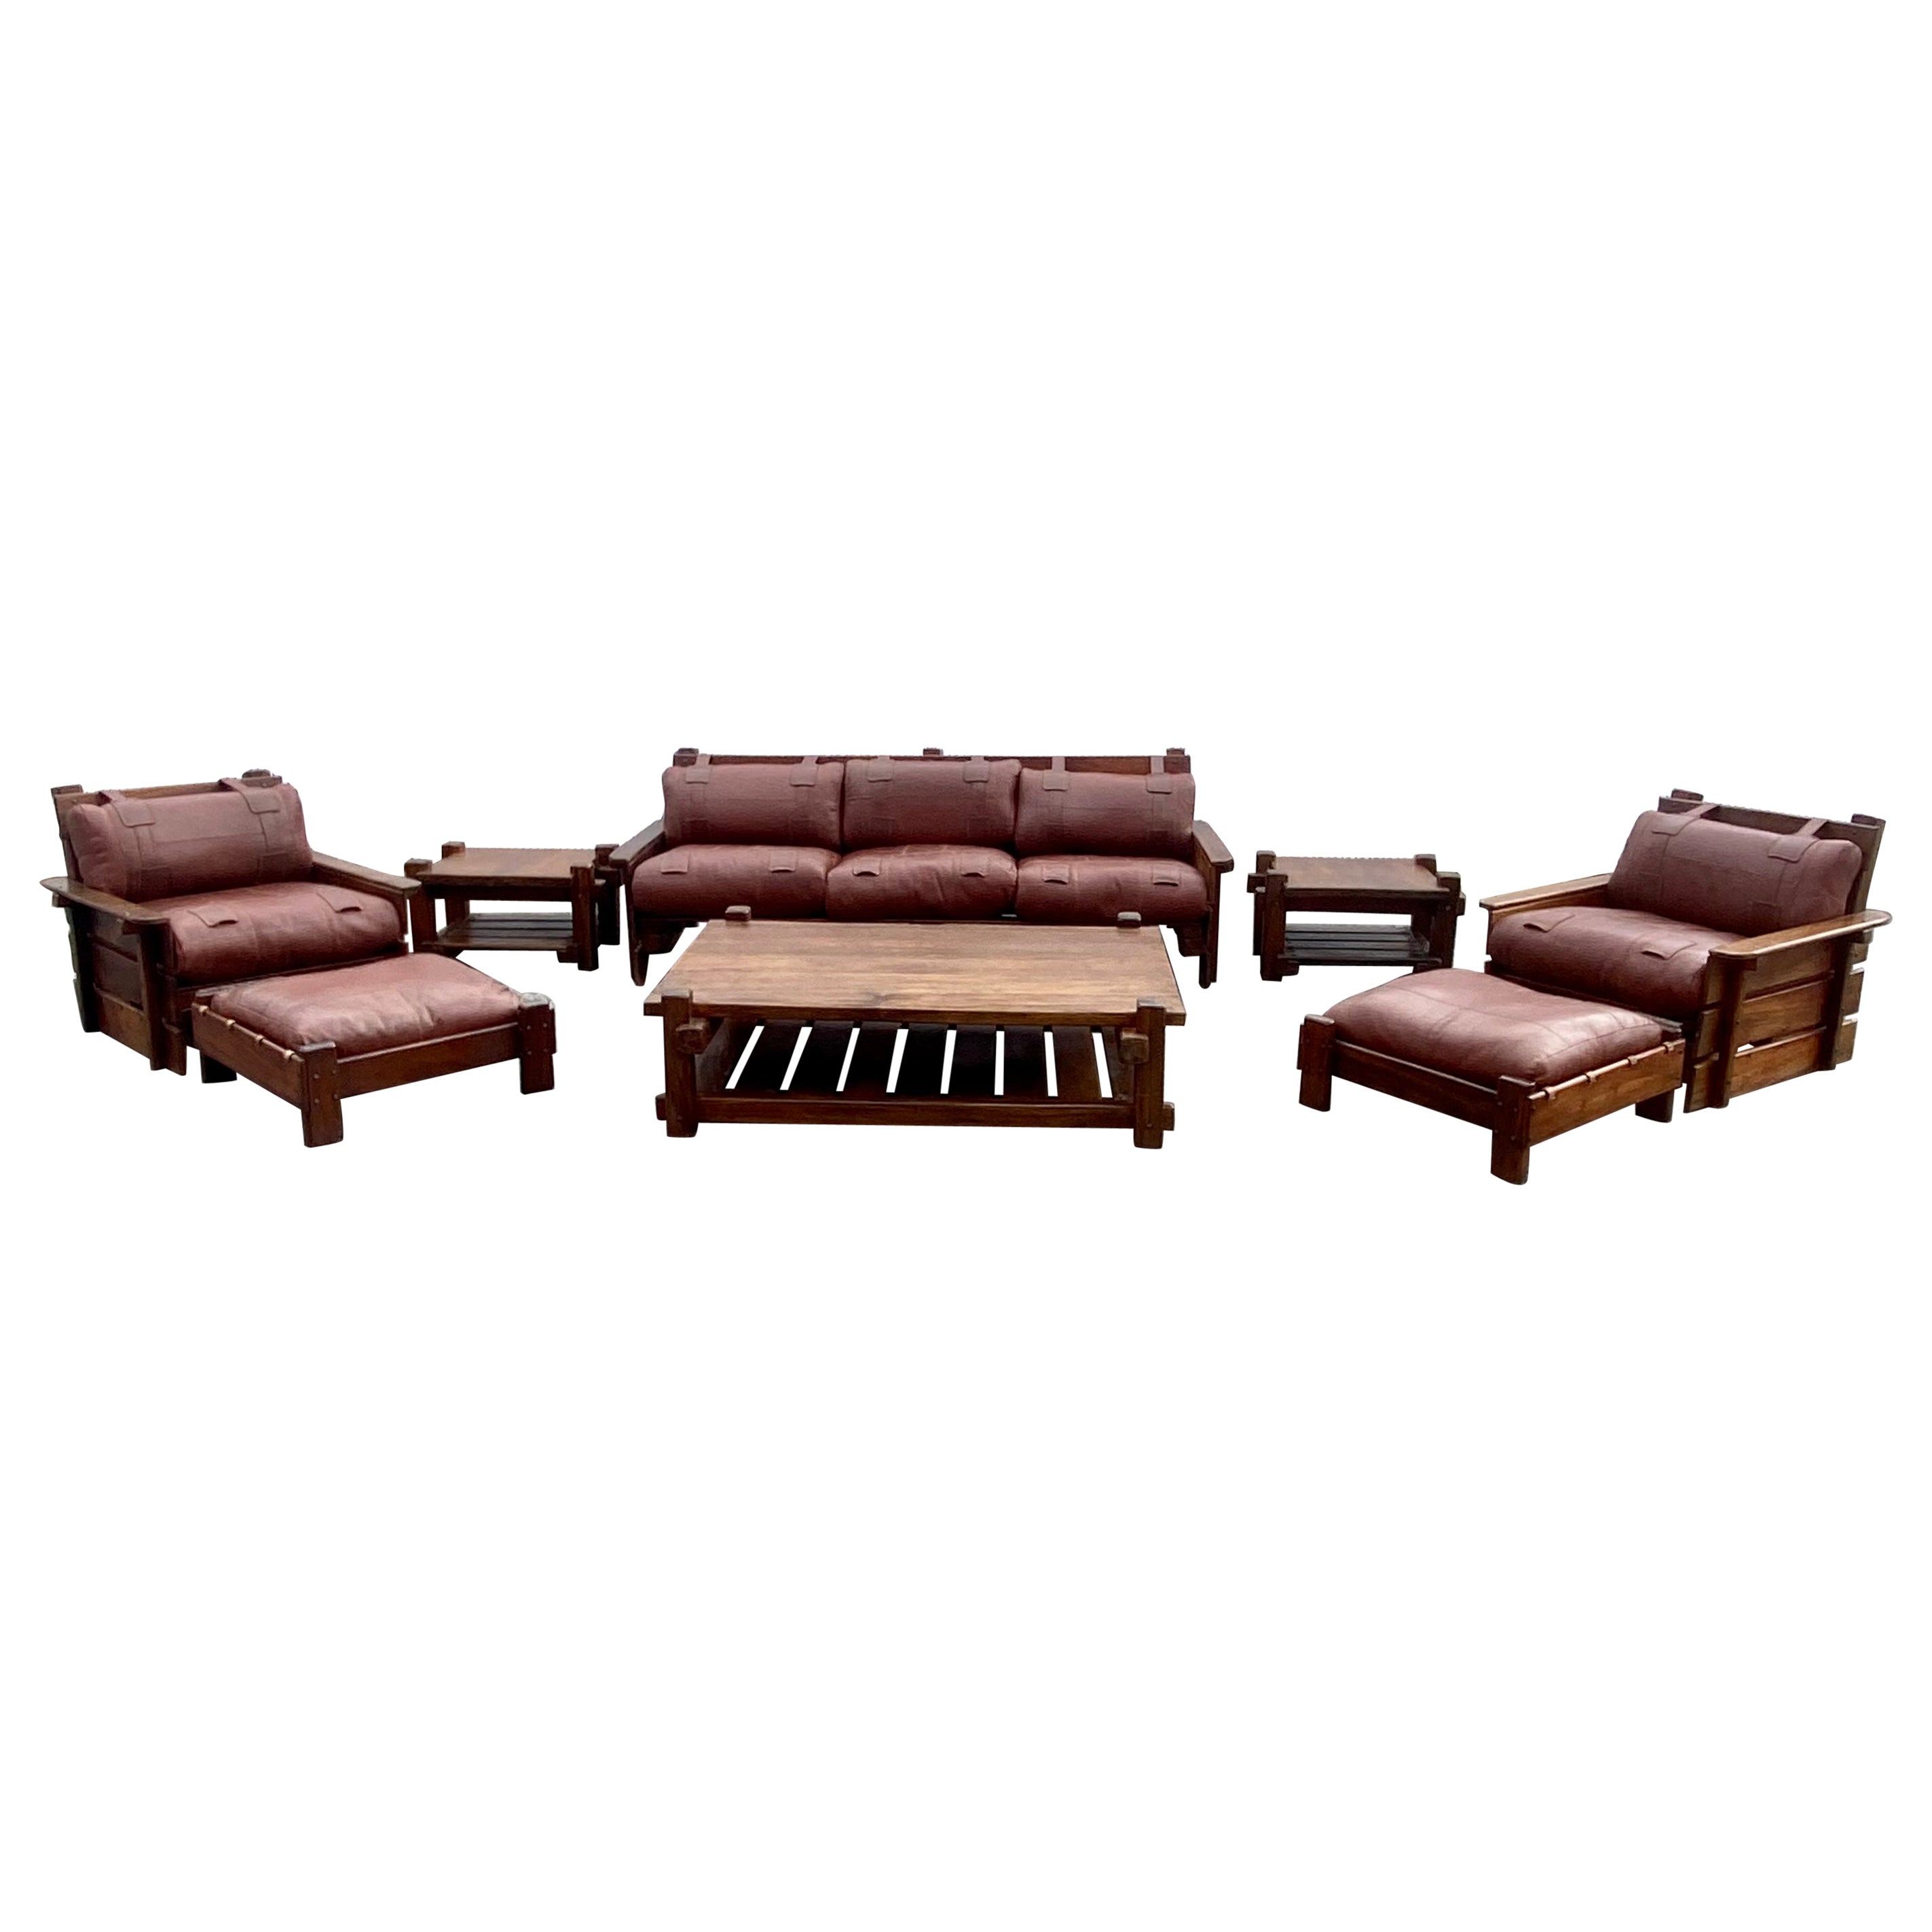 1930s Rustic Pine Saddle Leather Sling Living Room Suite, Set of 8 For Sale